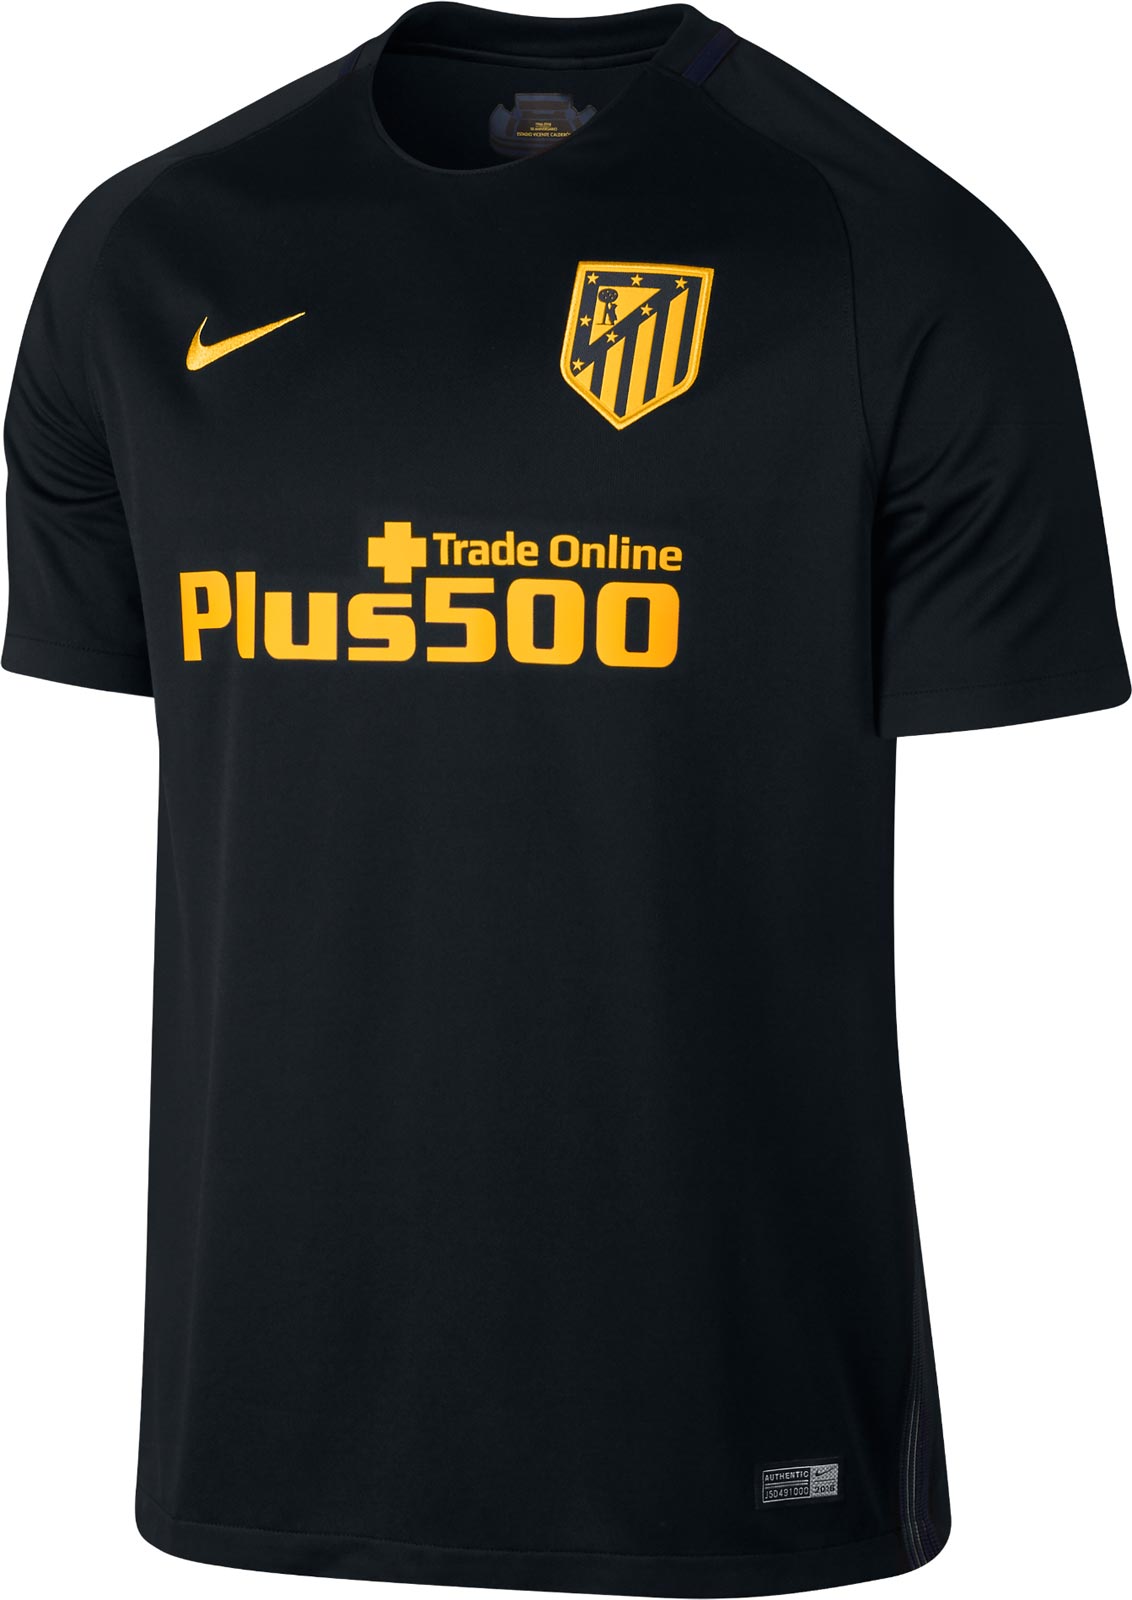 atletico-16-17-away-kit-front